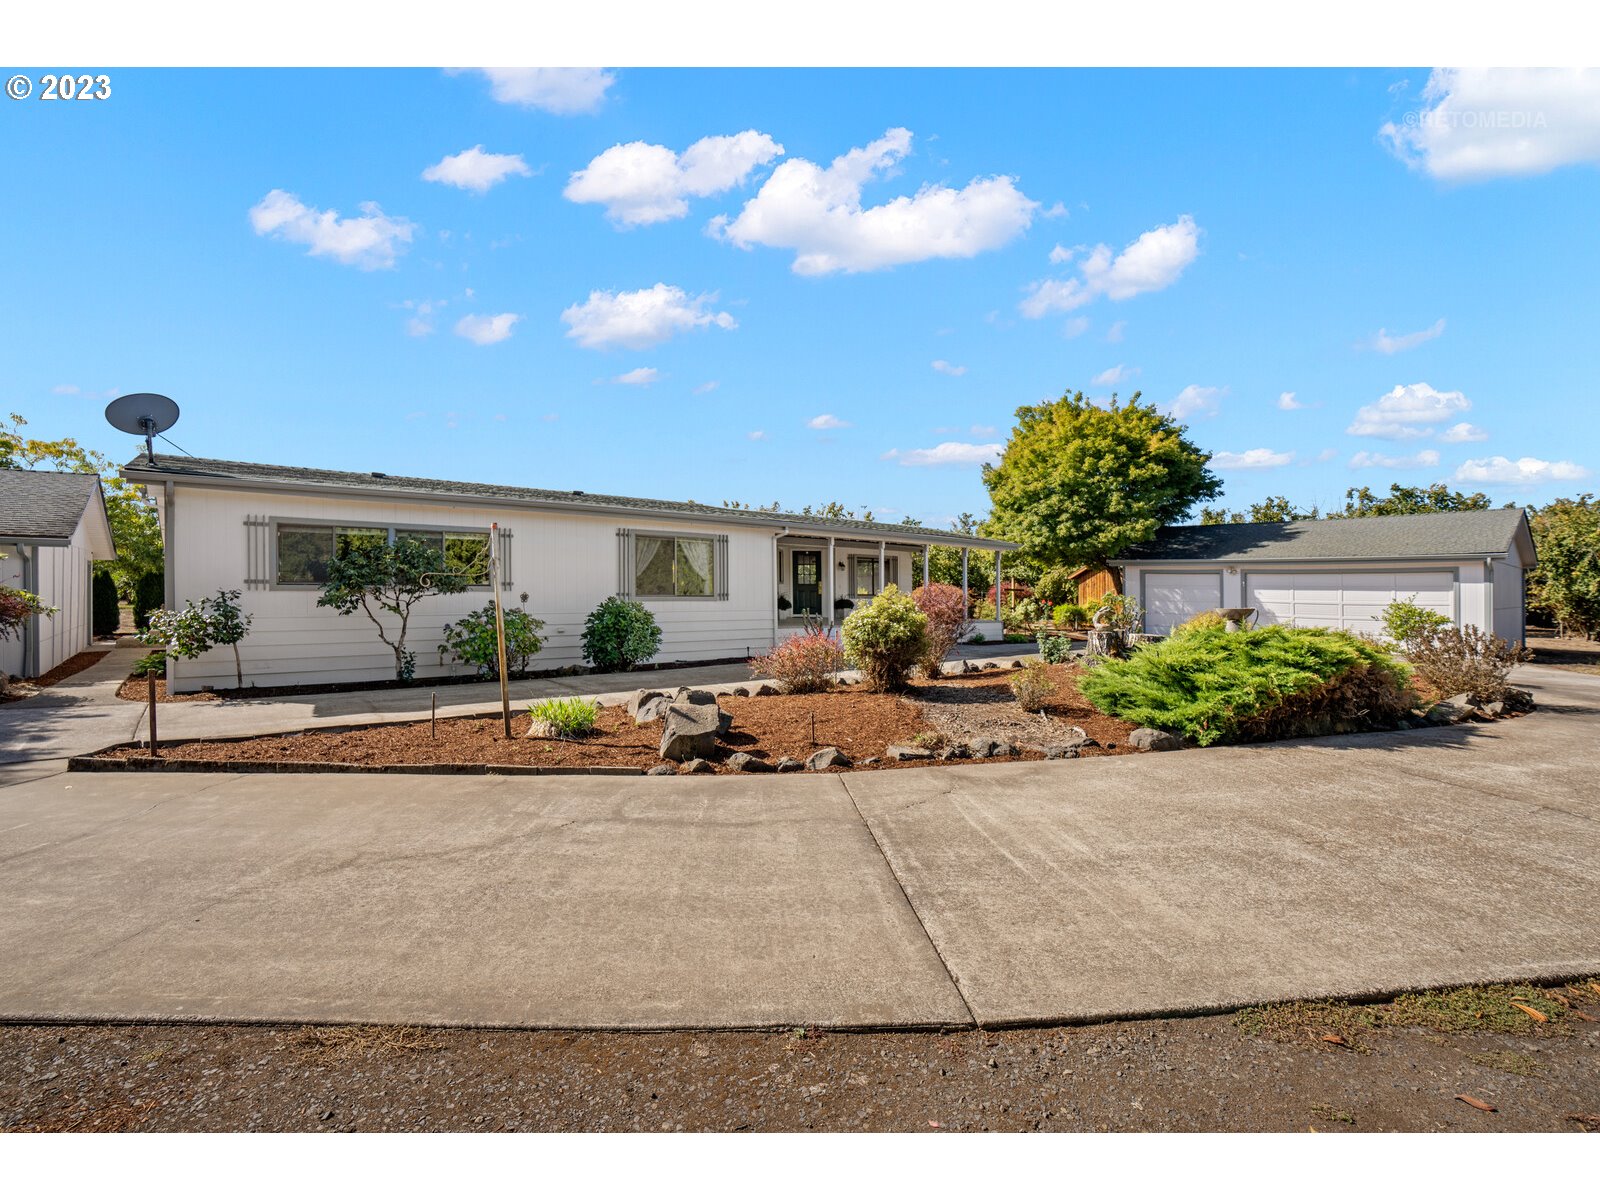 5050 NE MINERAL SPRINGS RD, McMinnville, OR 